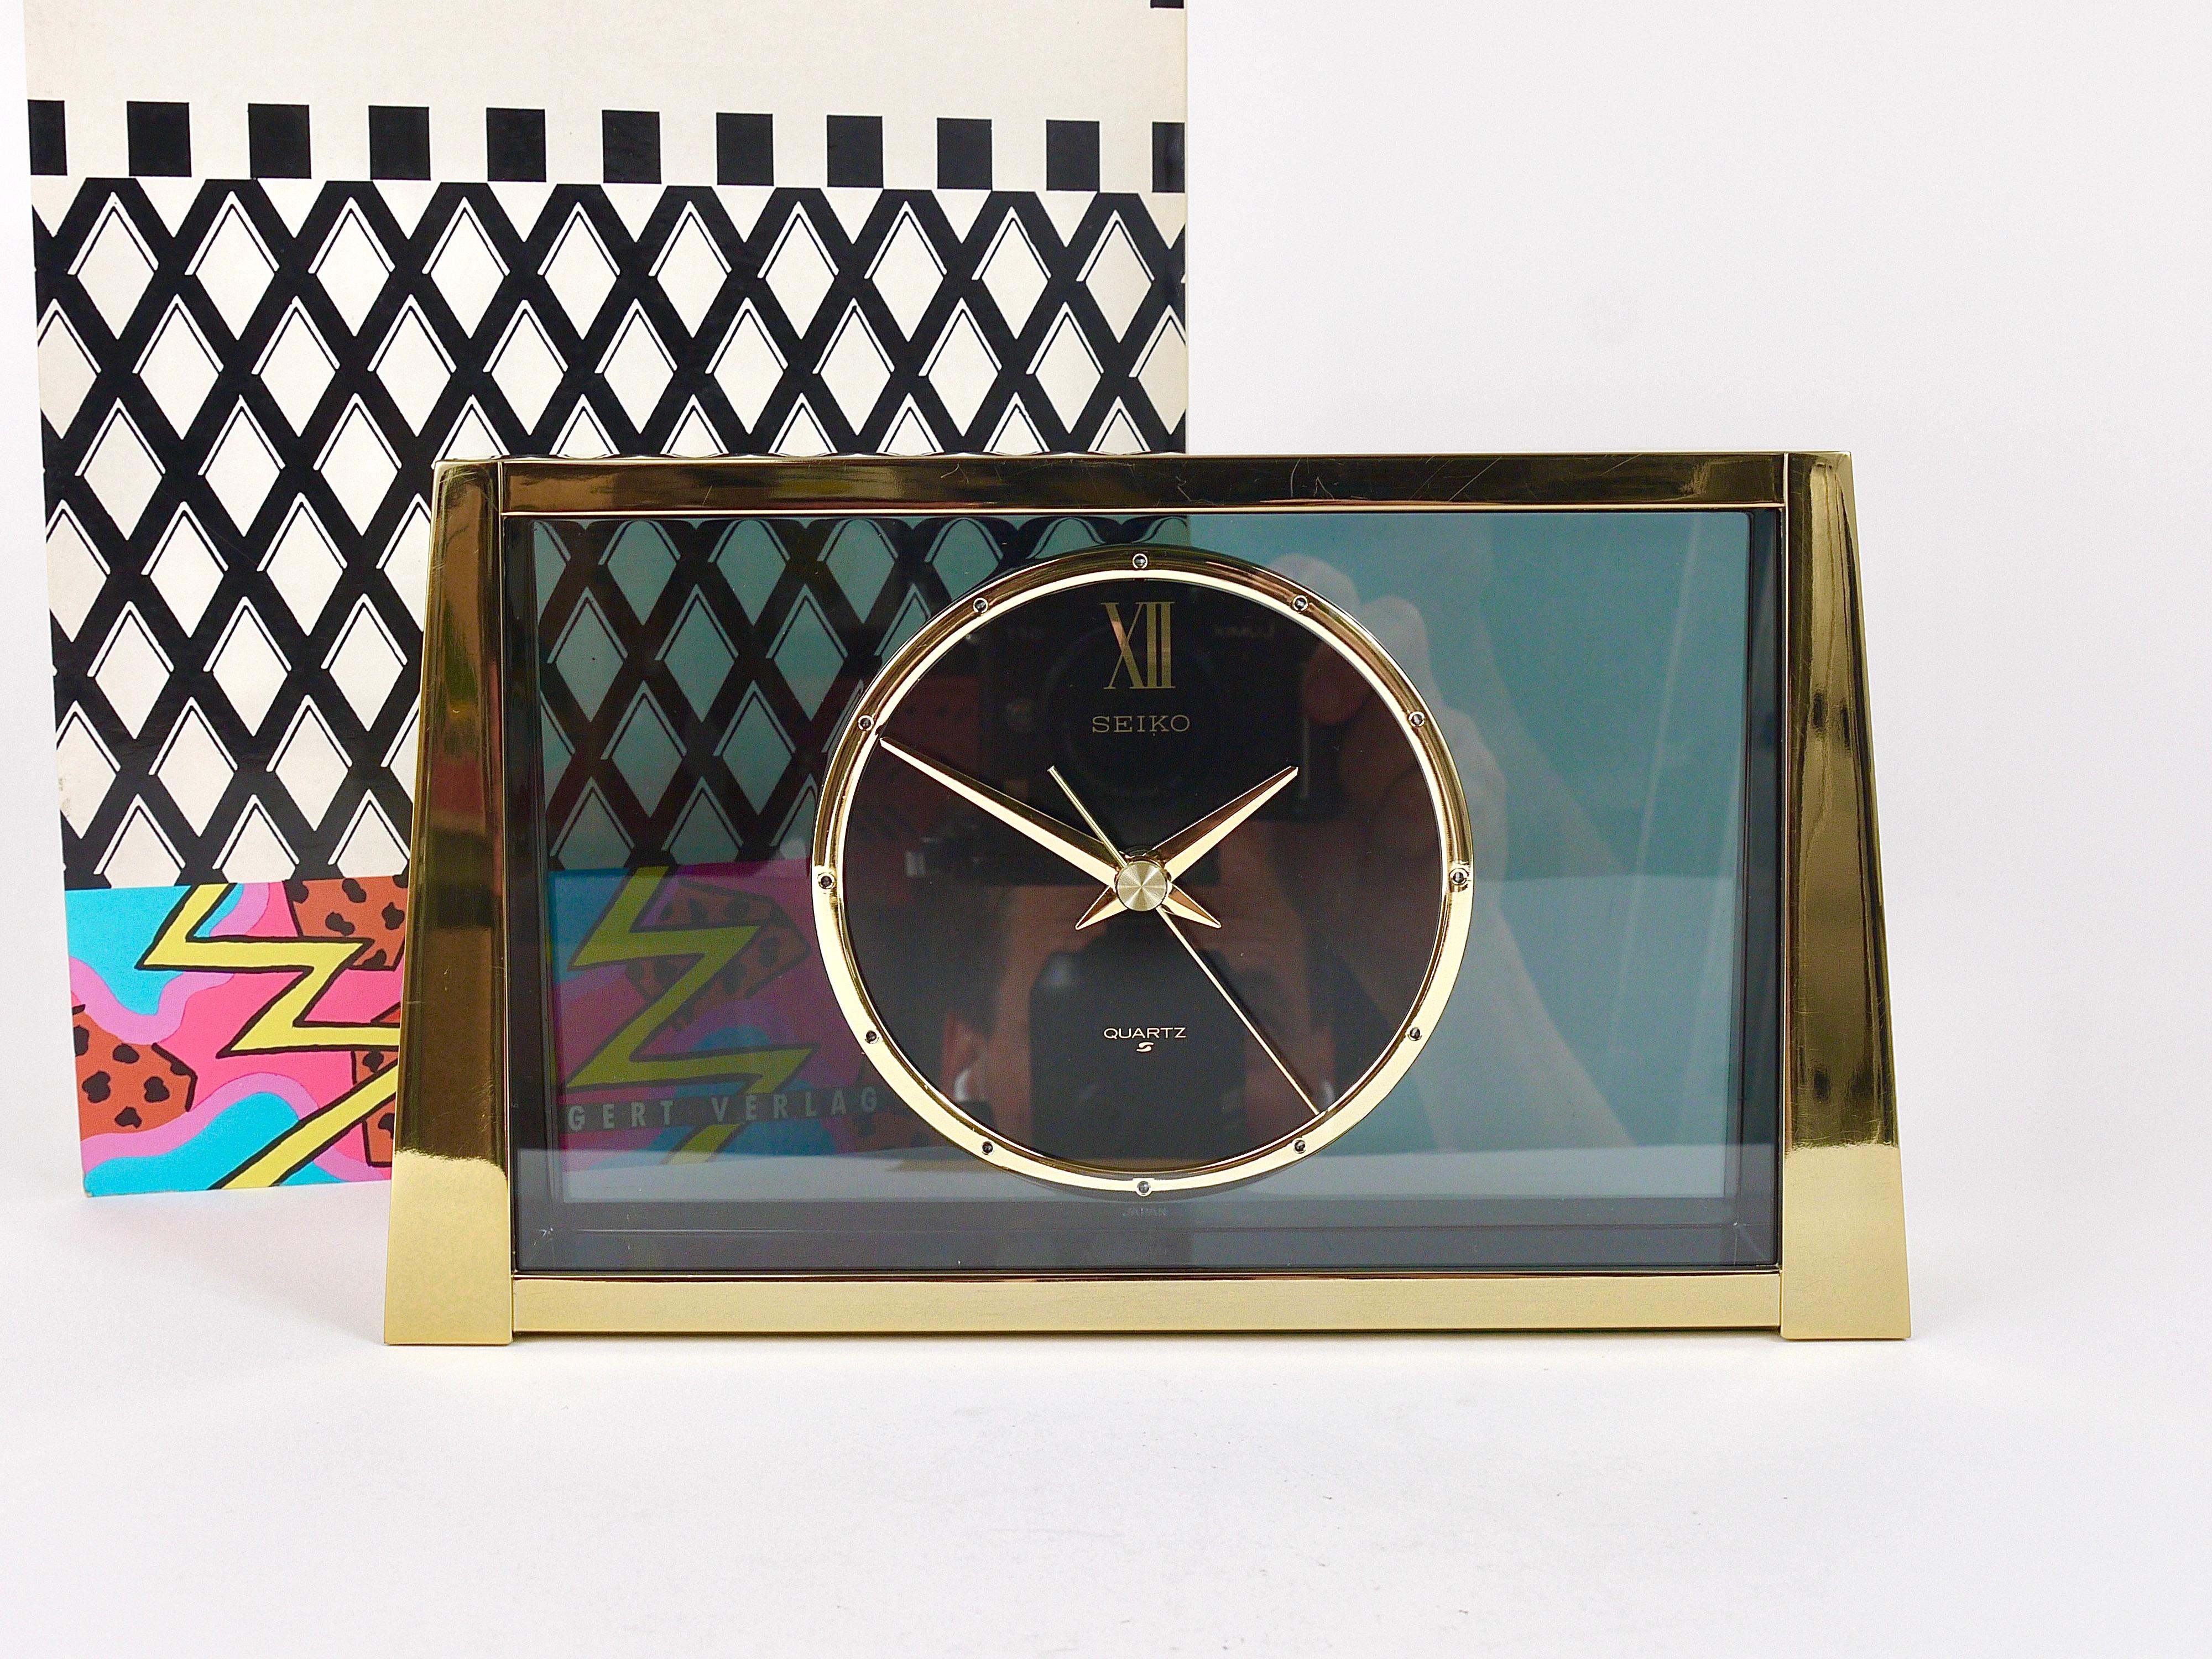 A decorative Hollywood Regency desk / table / mantel clock from the 1980s. It has a brushed brass housing with mirror polished front, nice golden handles and indices and a smoked-grey transparent 